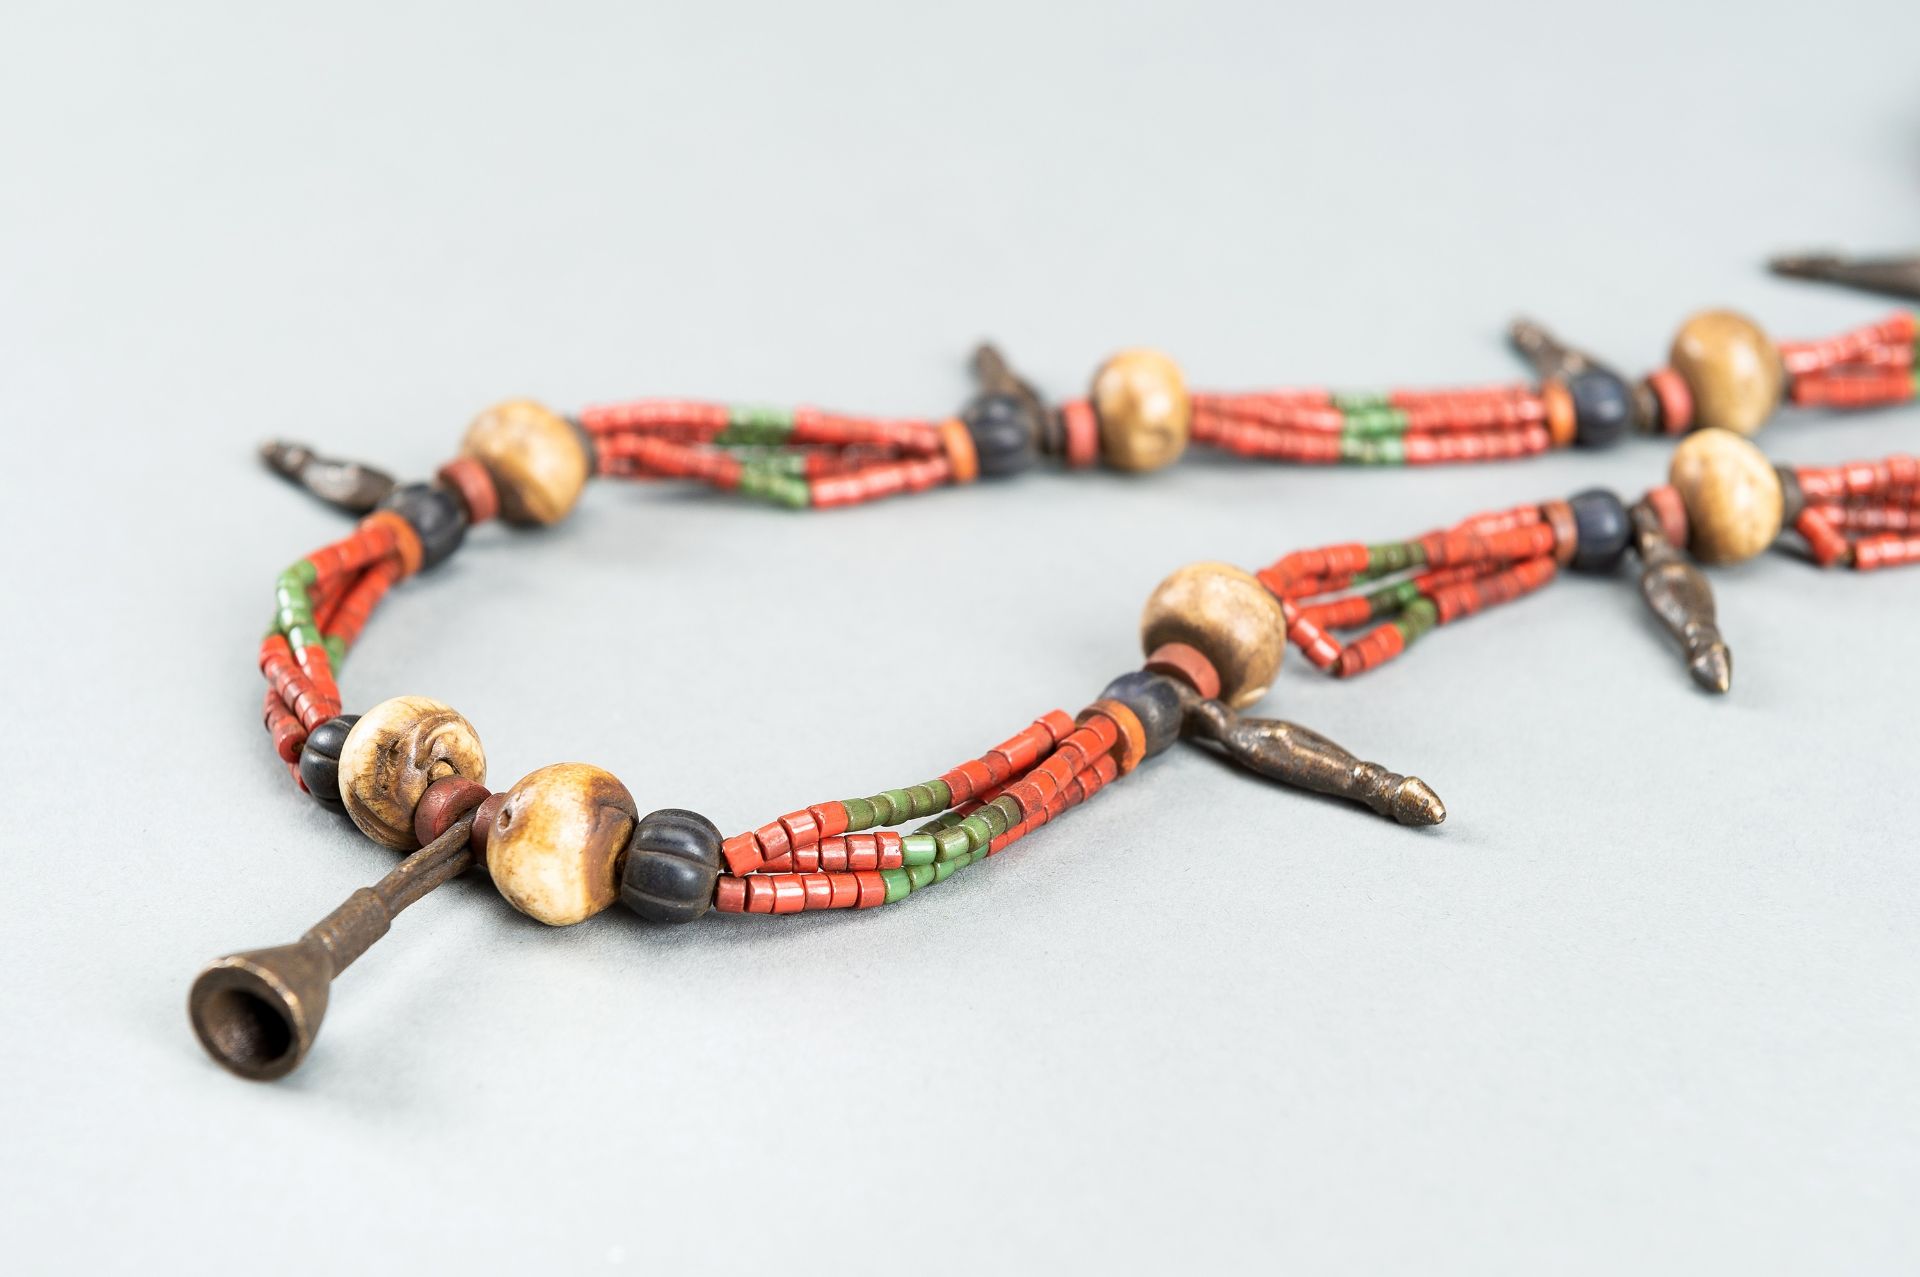 A NAGALAND MULTI-COLORED GLASS, BRASS AND SHELL NECKLACE, c. 1900s - Image 7 of 9